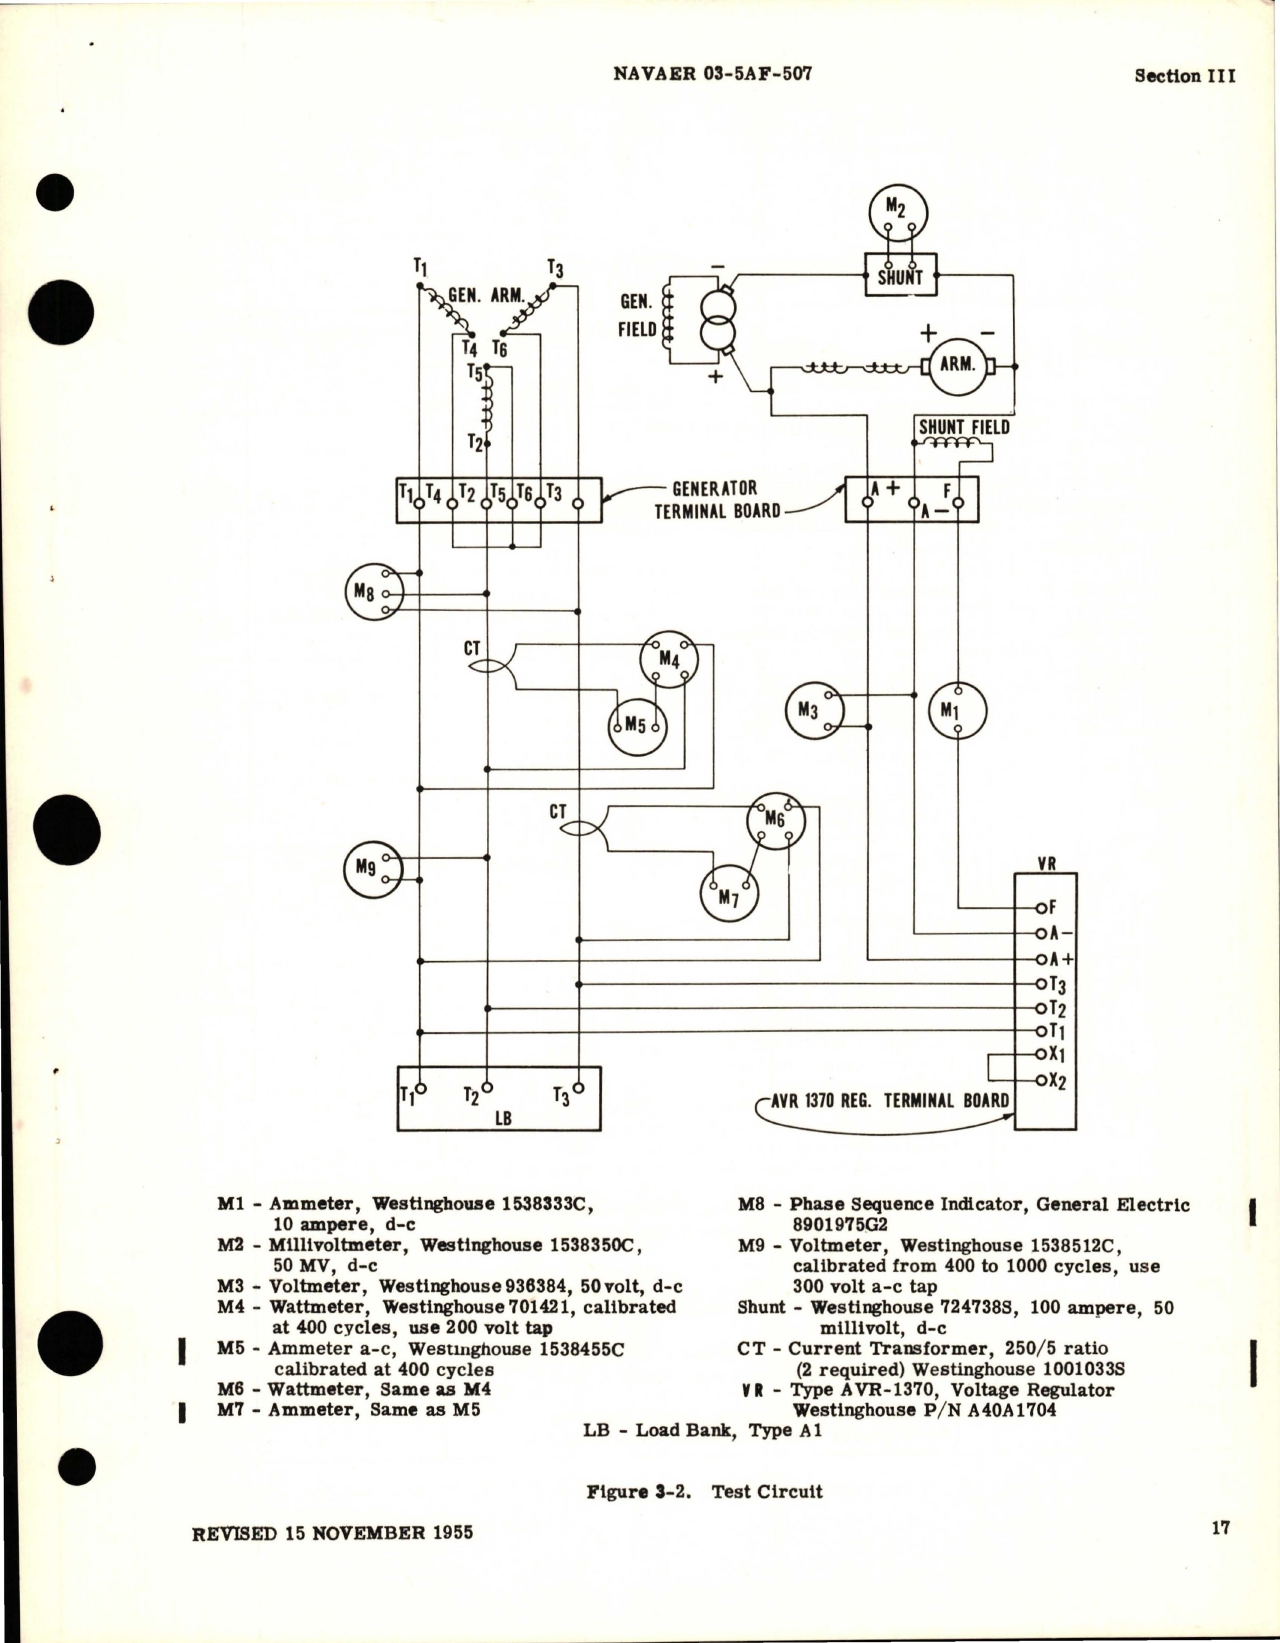 Sample page 5 from AirCorps Library document: Overhaul Instructions for AC Generator - Model A50J185-2